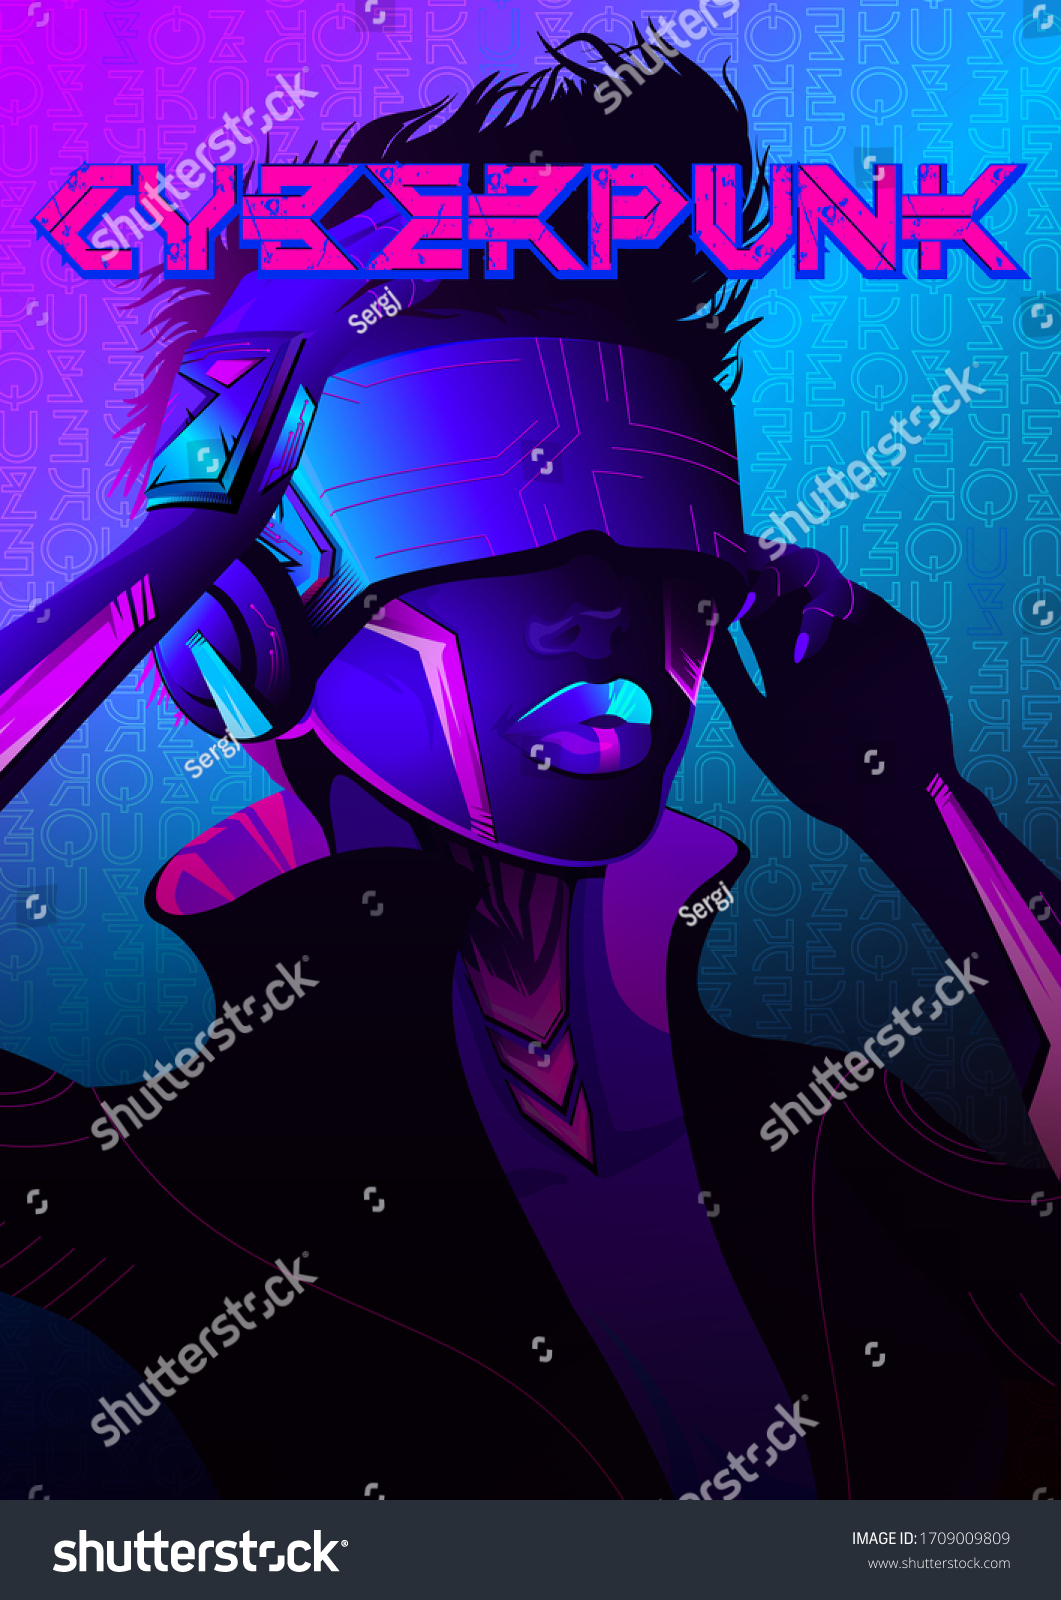 Cyberpunk Scifi Poster Colorful Vector Illustration Stock Vector Royalty Free 1709009809 6820